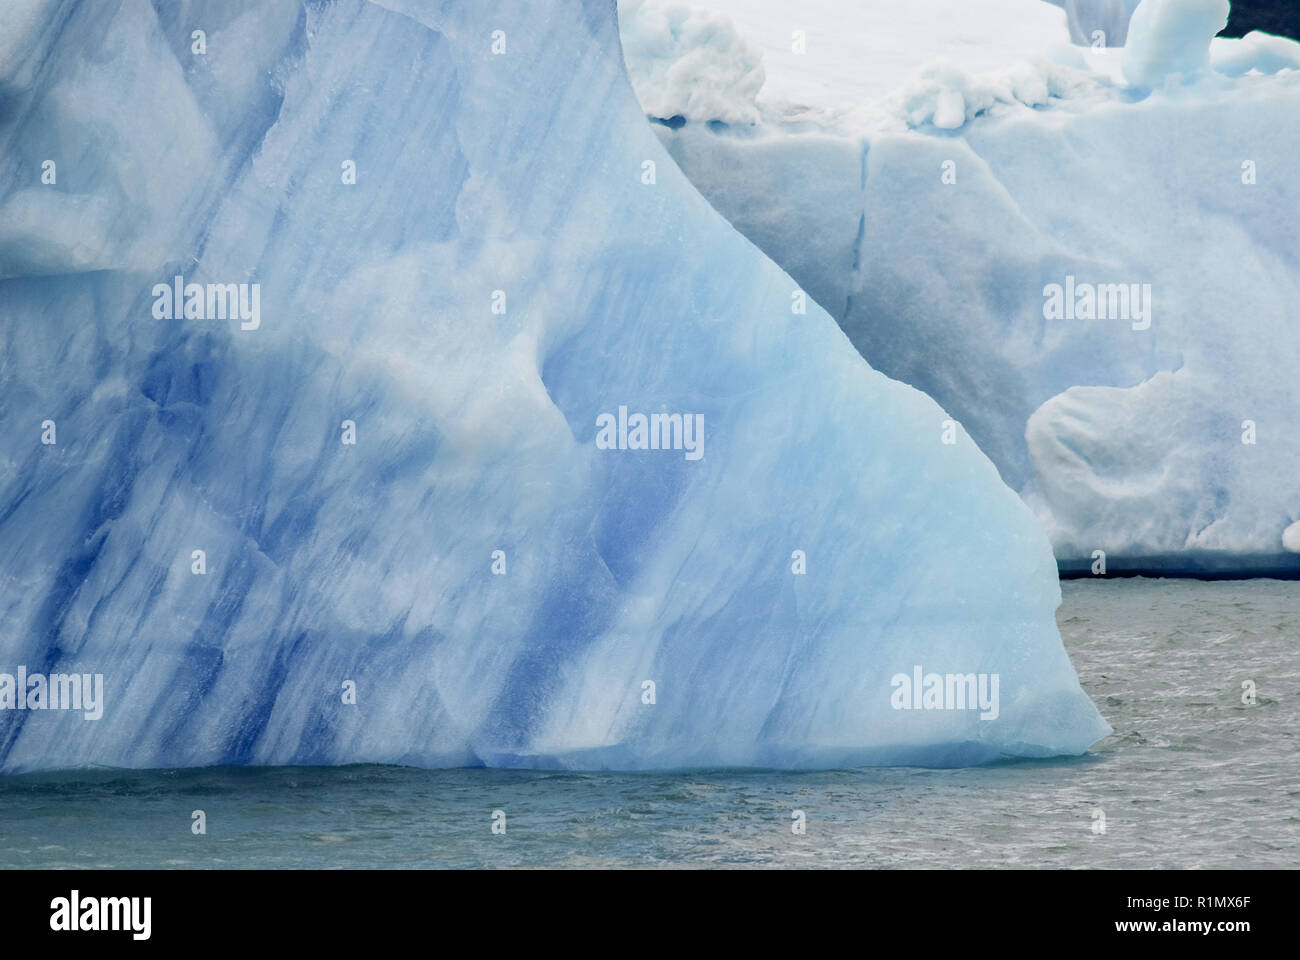 Drifting icebergs on Argentino lake in Patagonia Argentina Stock Photo